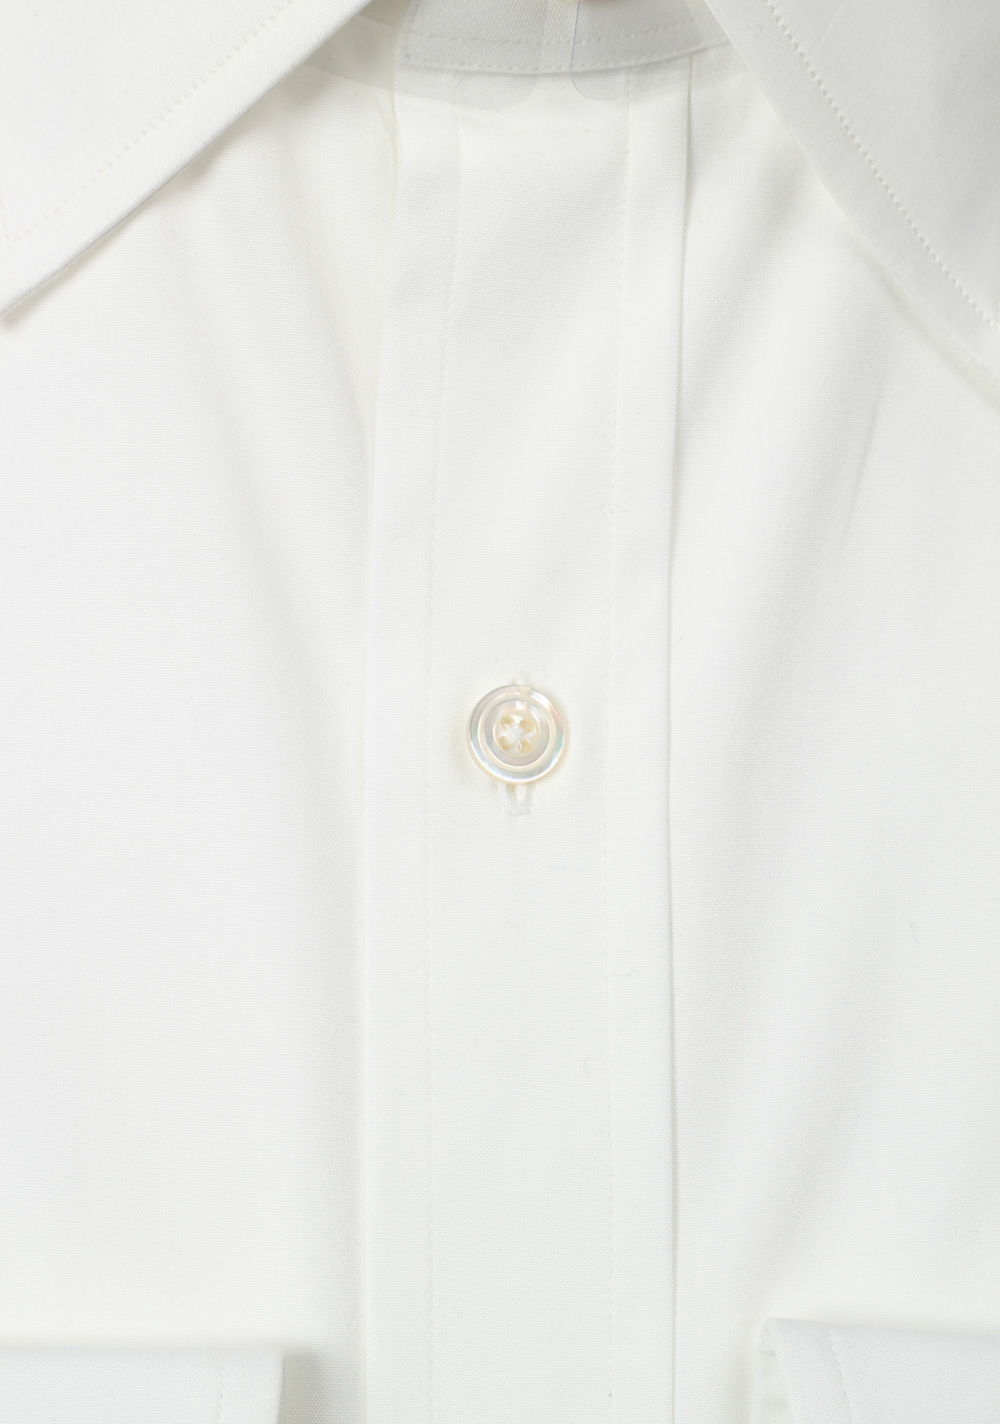 TOM FORD Solid White Shirt Size 42 / 16,5 U.S. | Costume Limité